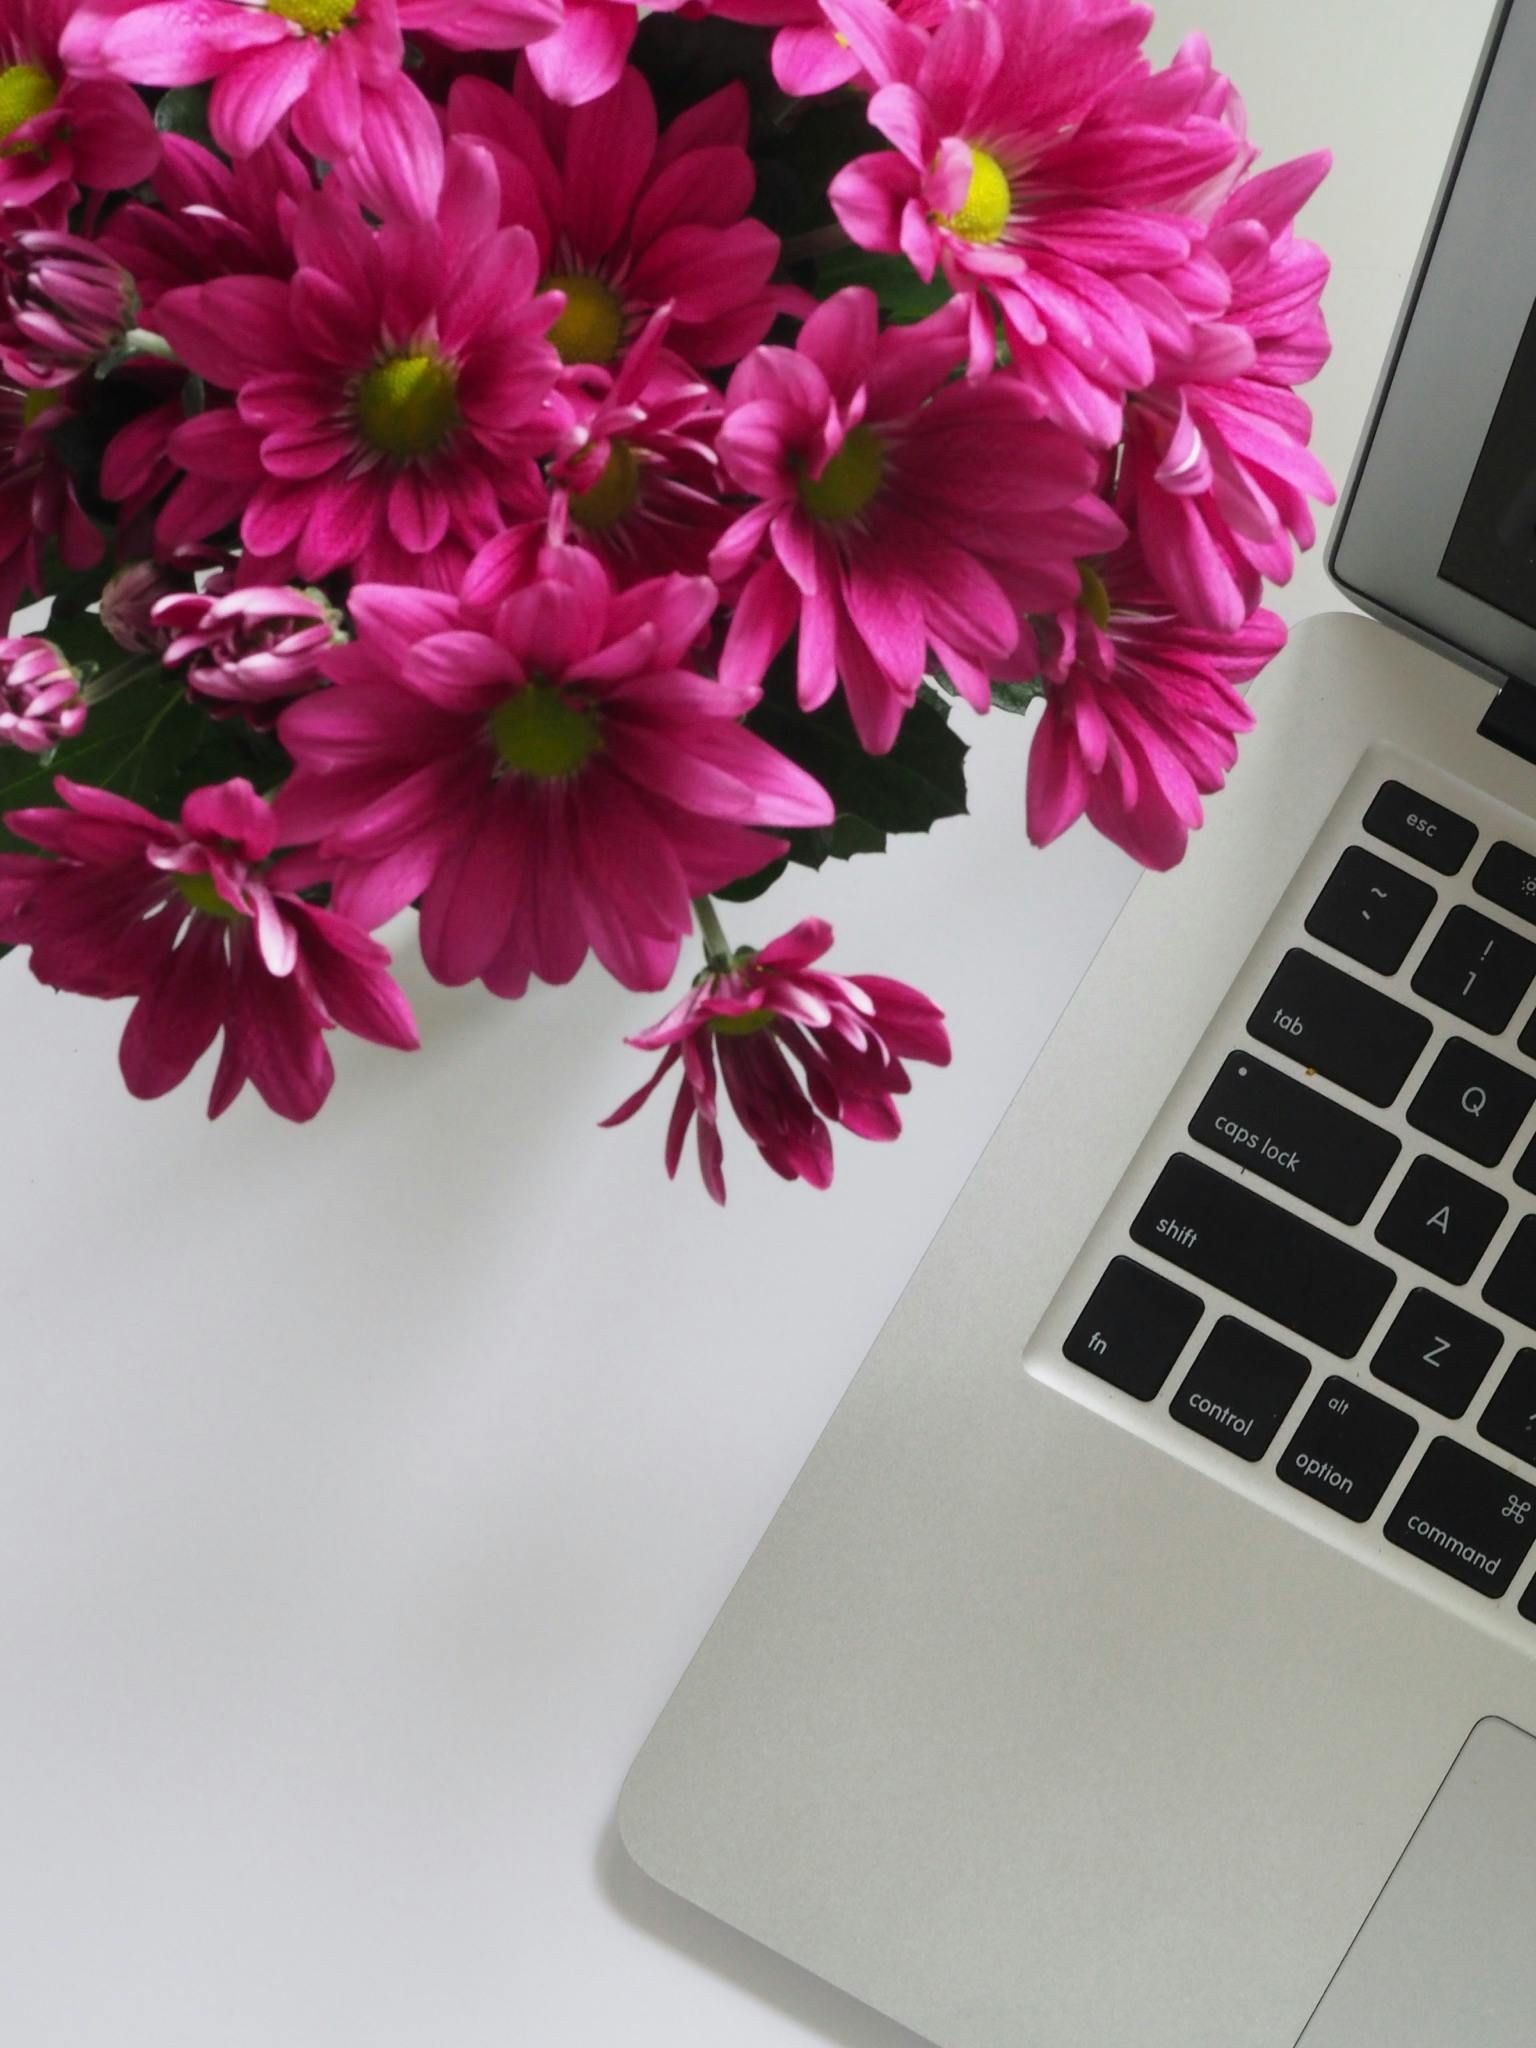 A bunch of pink flowers next to a laptop